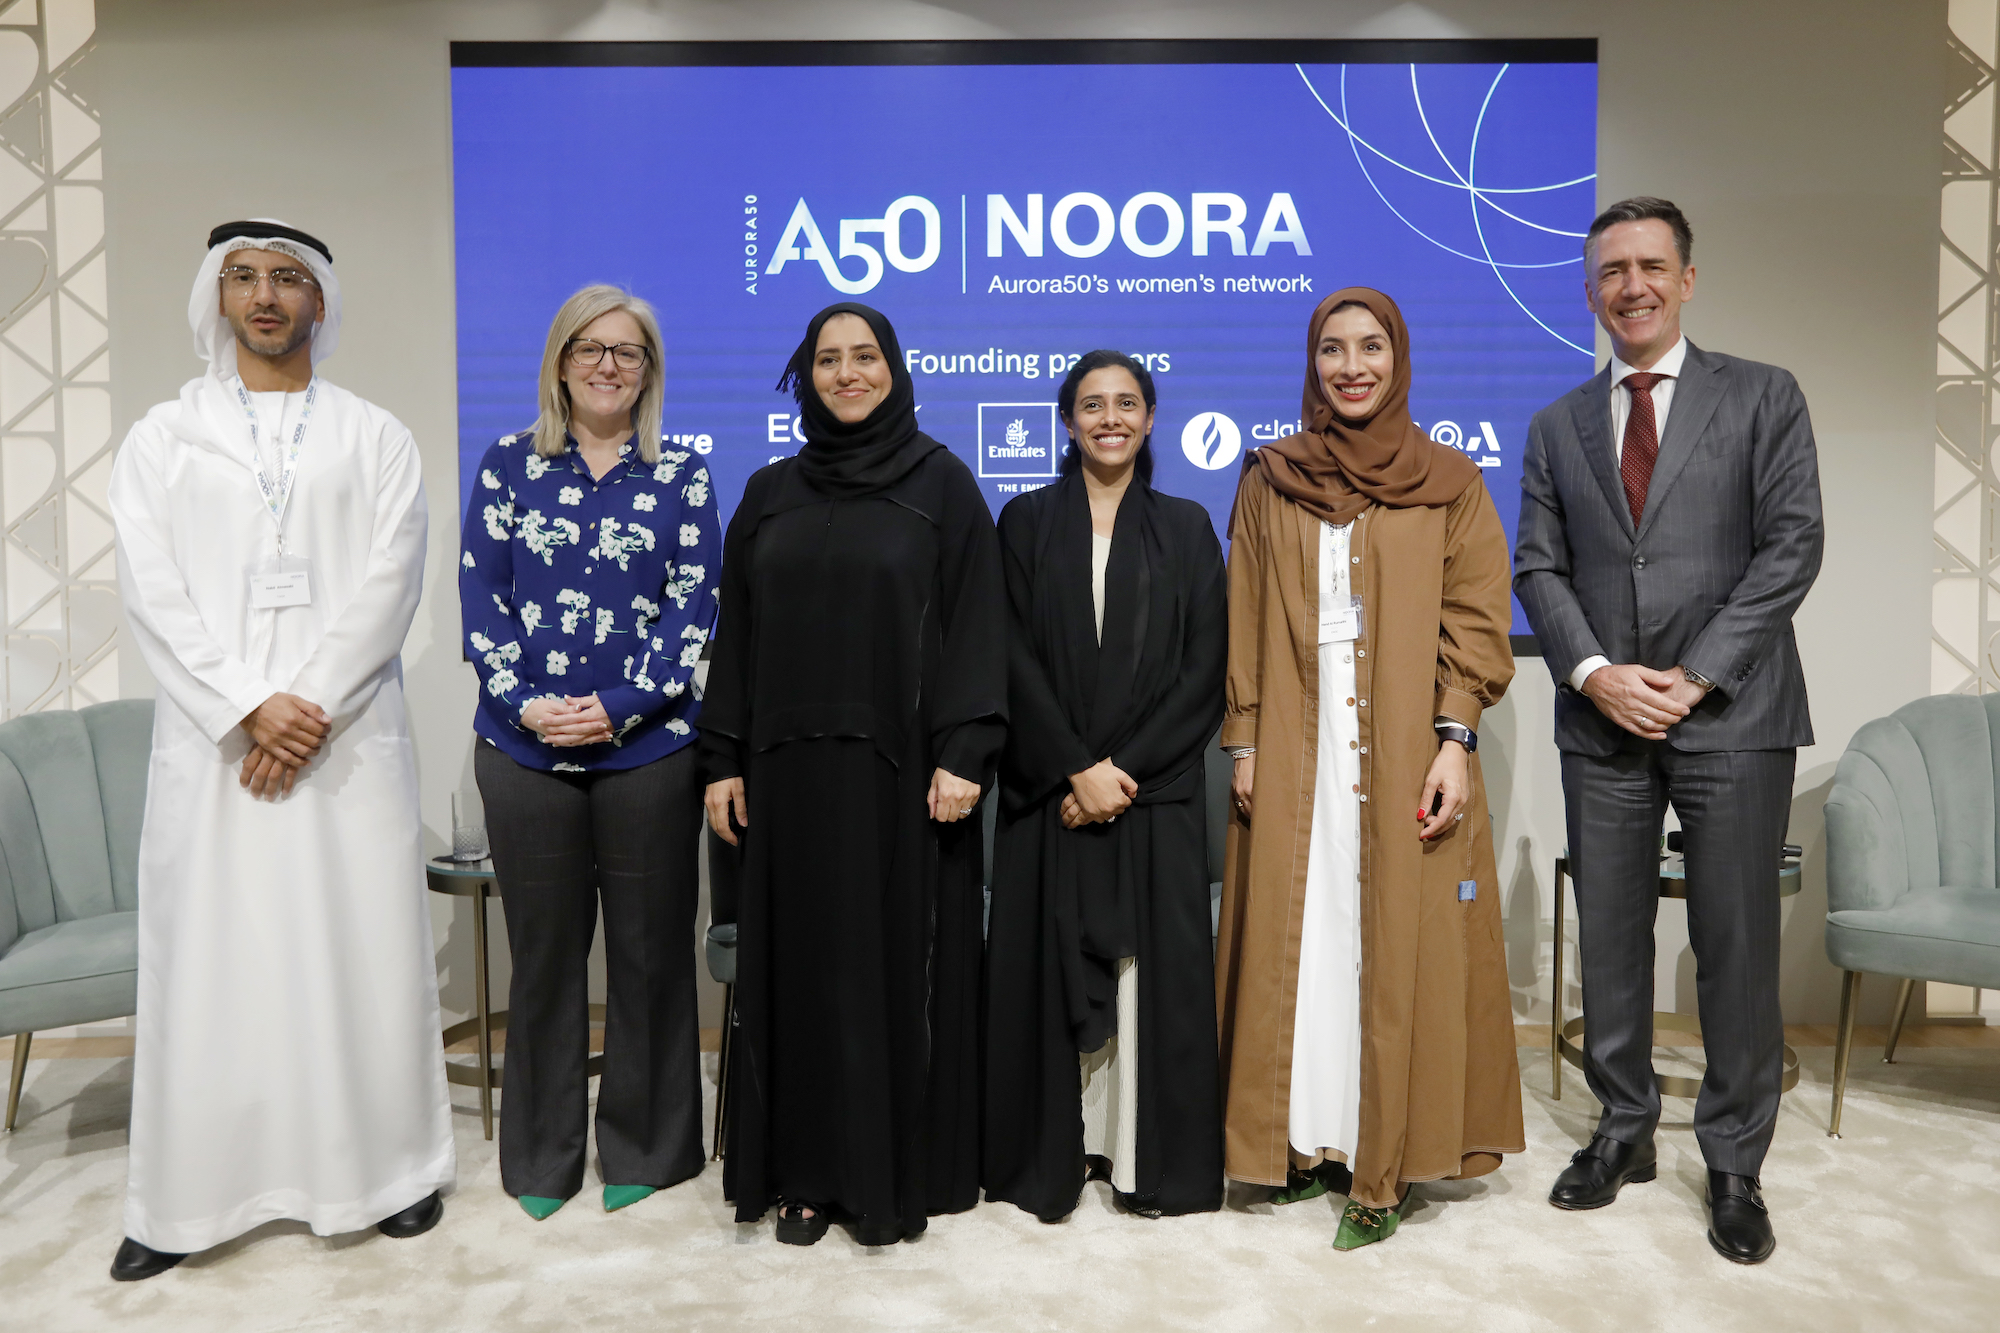 The launch of corporate women's network NOORA on 31 July 2023 at the Women's Pavillion, Expo City, Dubai. From left to right: Nabil Almessabi, Chief Human Resources Officer, TAQA; Diana Wilde, co-founder, Aurora50; Nadya Abdulla Kamali, Country Managing Director, UAE, Accenture; Laila Saif, Director, Human Capital Strategy & Operations, EGA; Hend Al Rumaithi, Senior Director, Group Internal Audit & Chief Ethics & Compliance Officer, ENOC; and Oliver Grohmann, Group Head of Human Resources, Emirates Group. Credit: Aurora50|Diana Wilde, co-founder of Aurora50, leads panel discussion at the launch of corporate women's network NOORA on 31 July 2023 at the Women's Pavillion, Expo City, Dubai